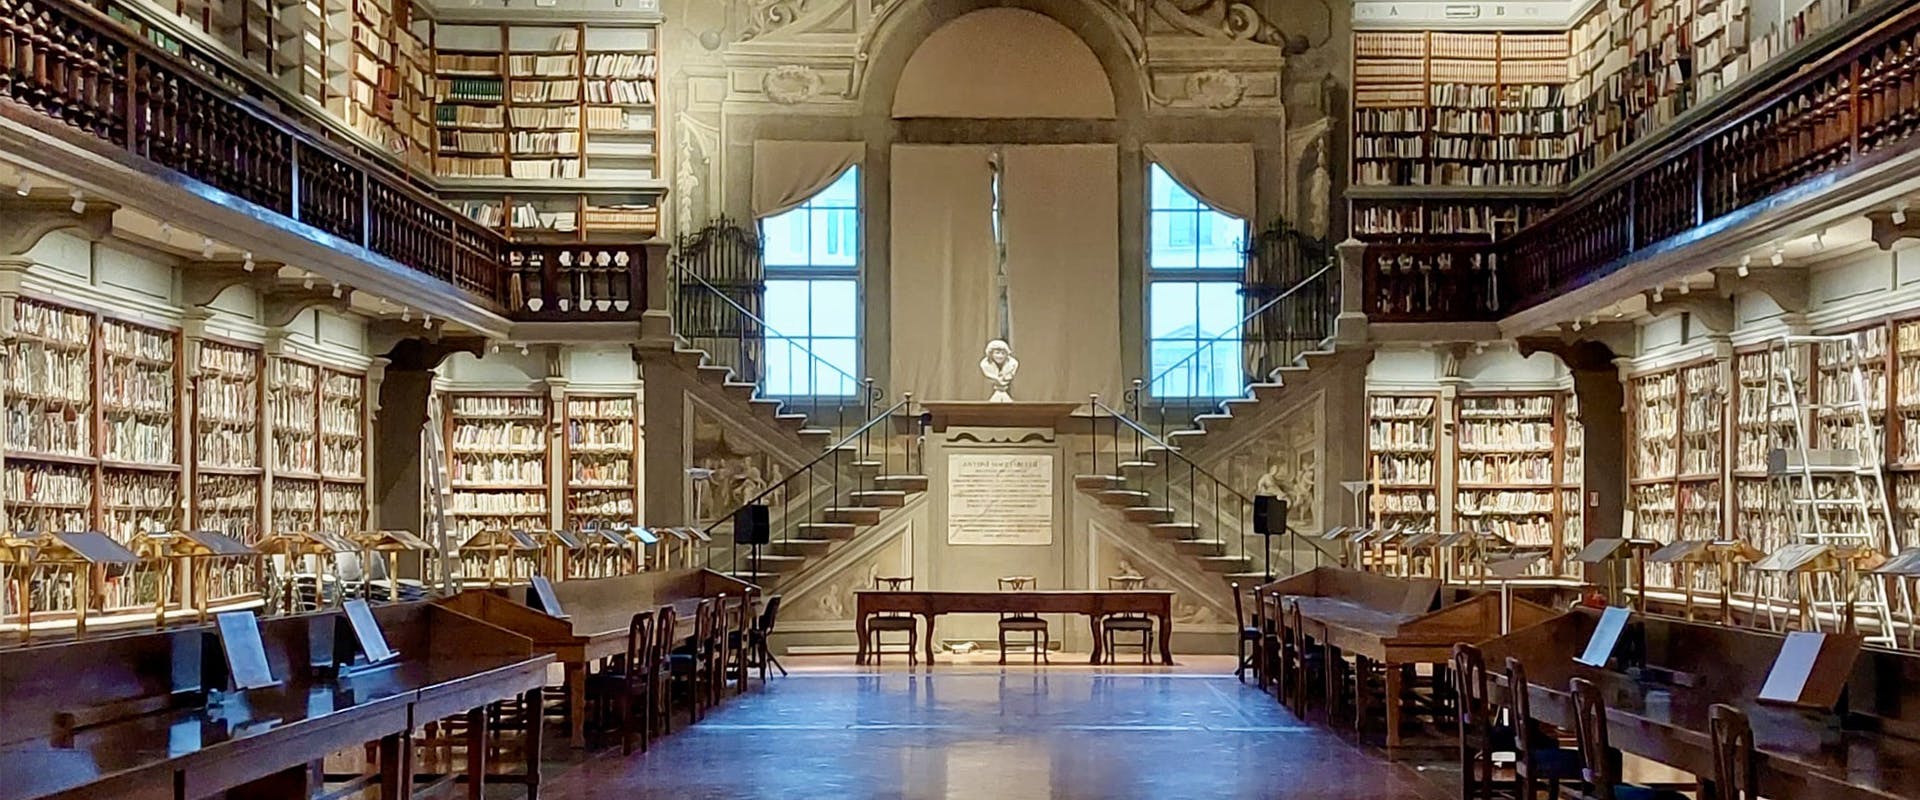 The Uffizi Library reopens with new lighting